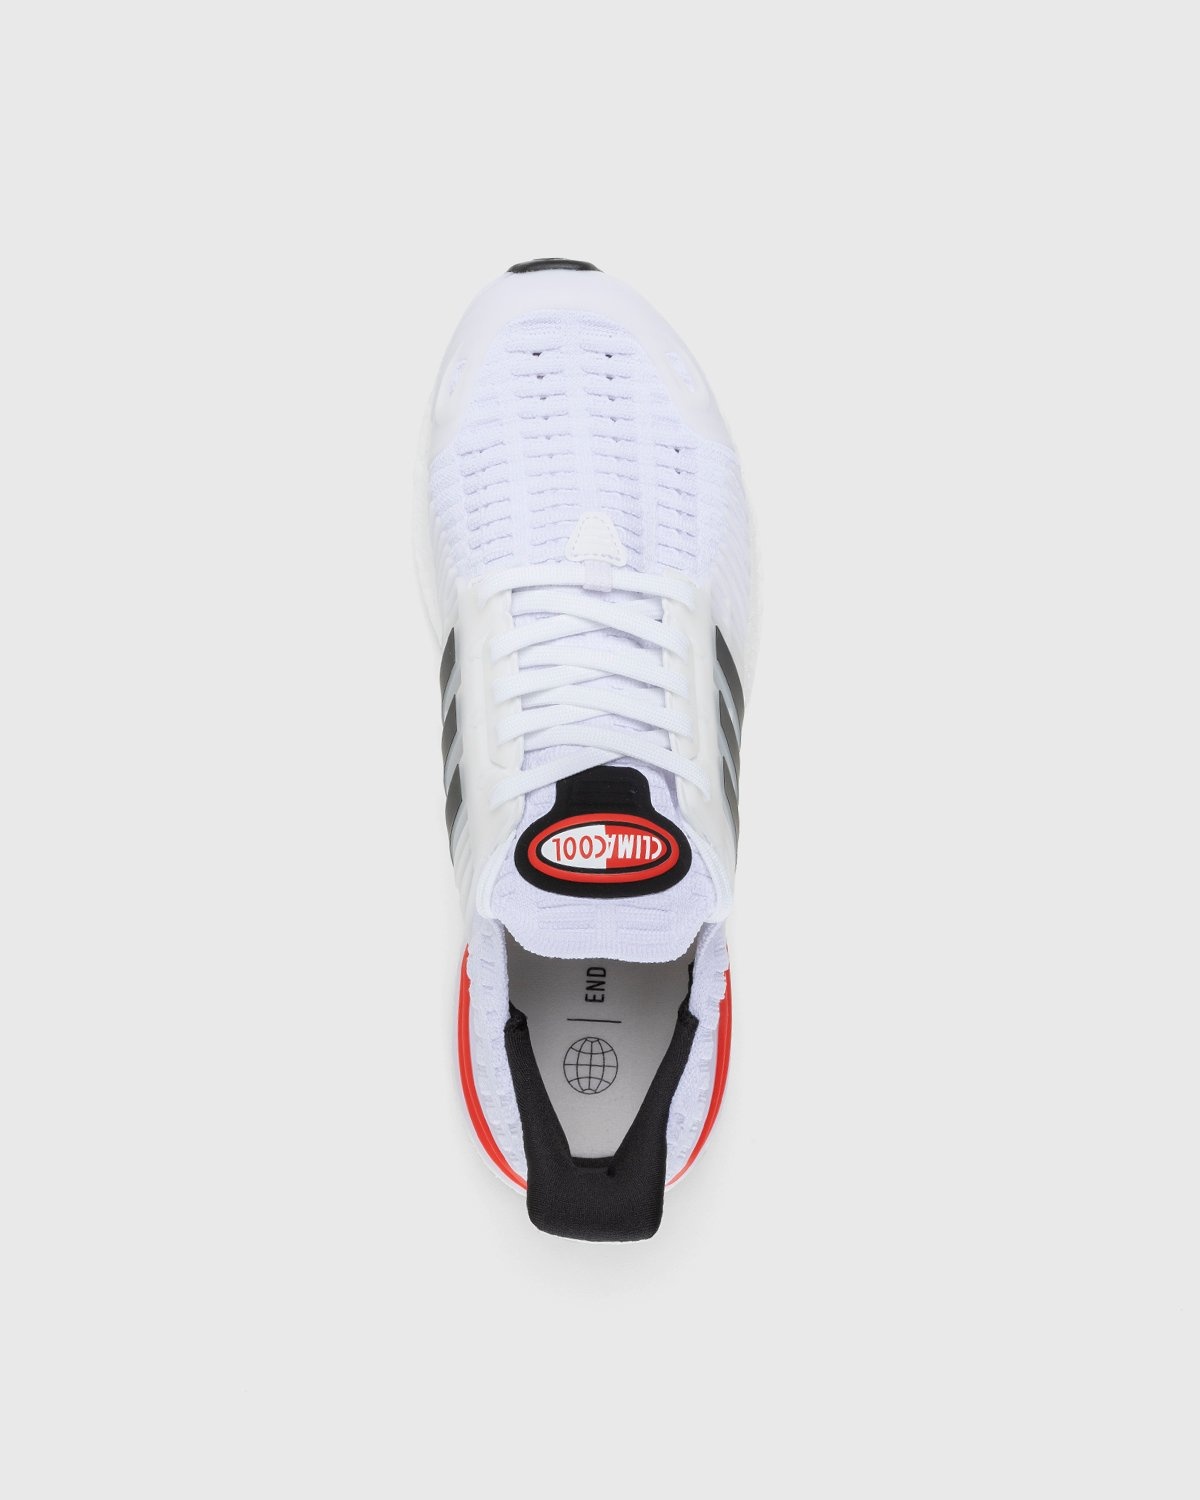 Adidas – Ultraboost Climacool 1 DNA White/Black/Red - Low Top Sneakers - White - Image 5